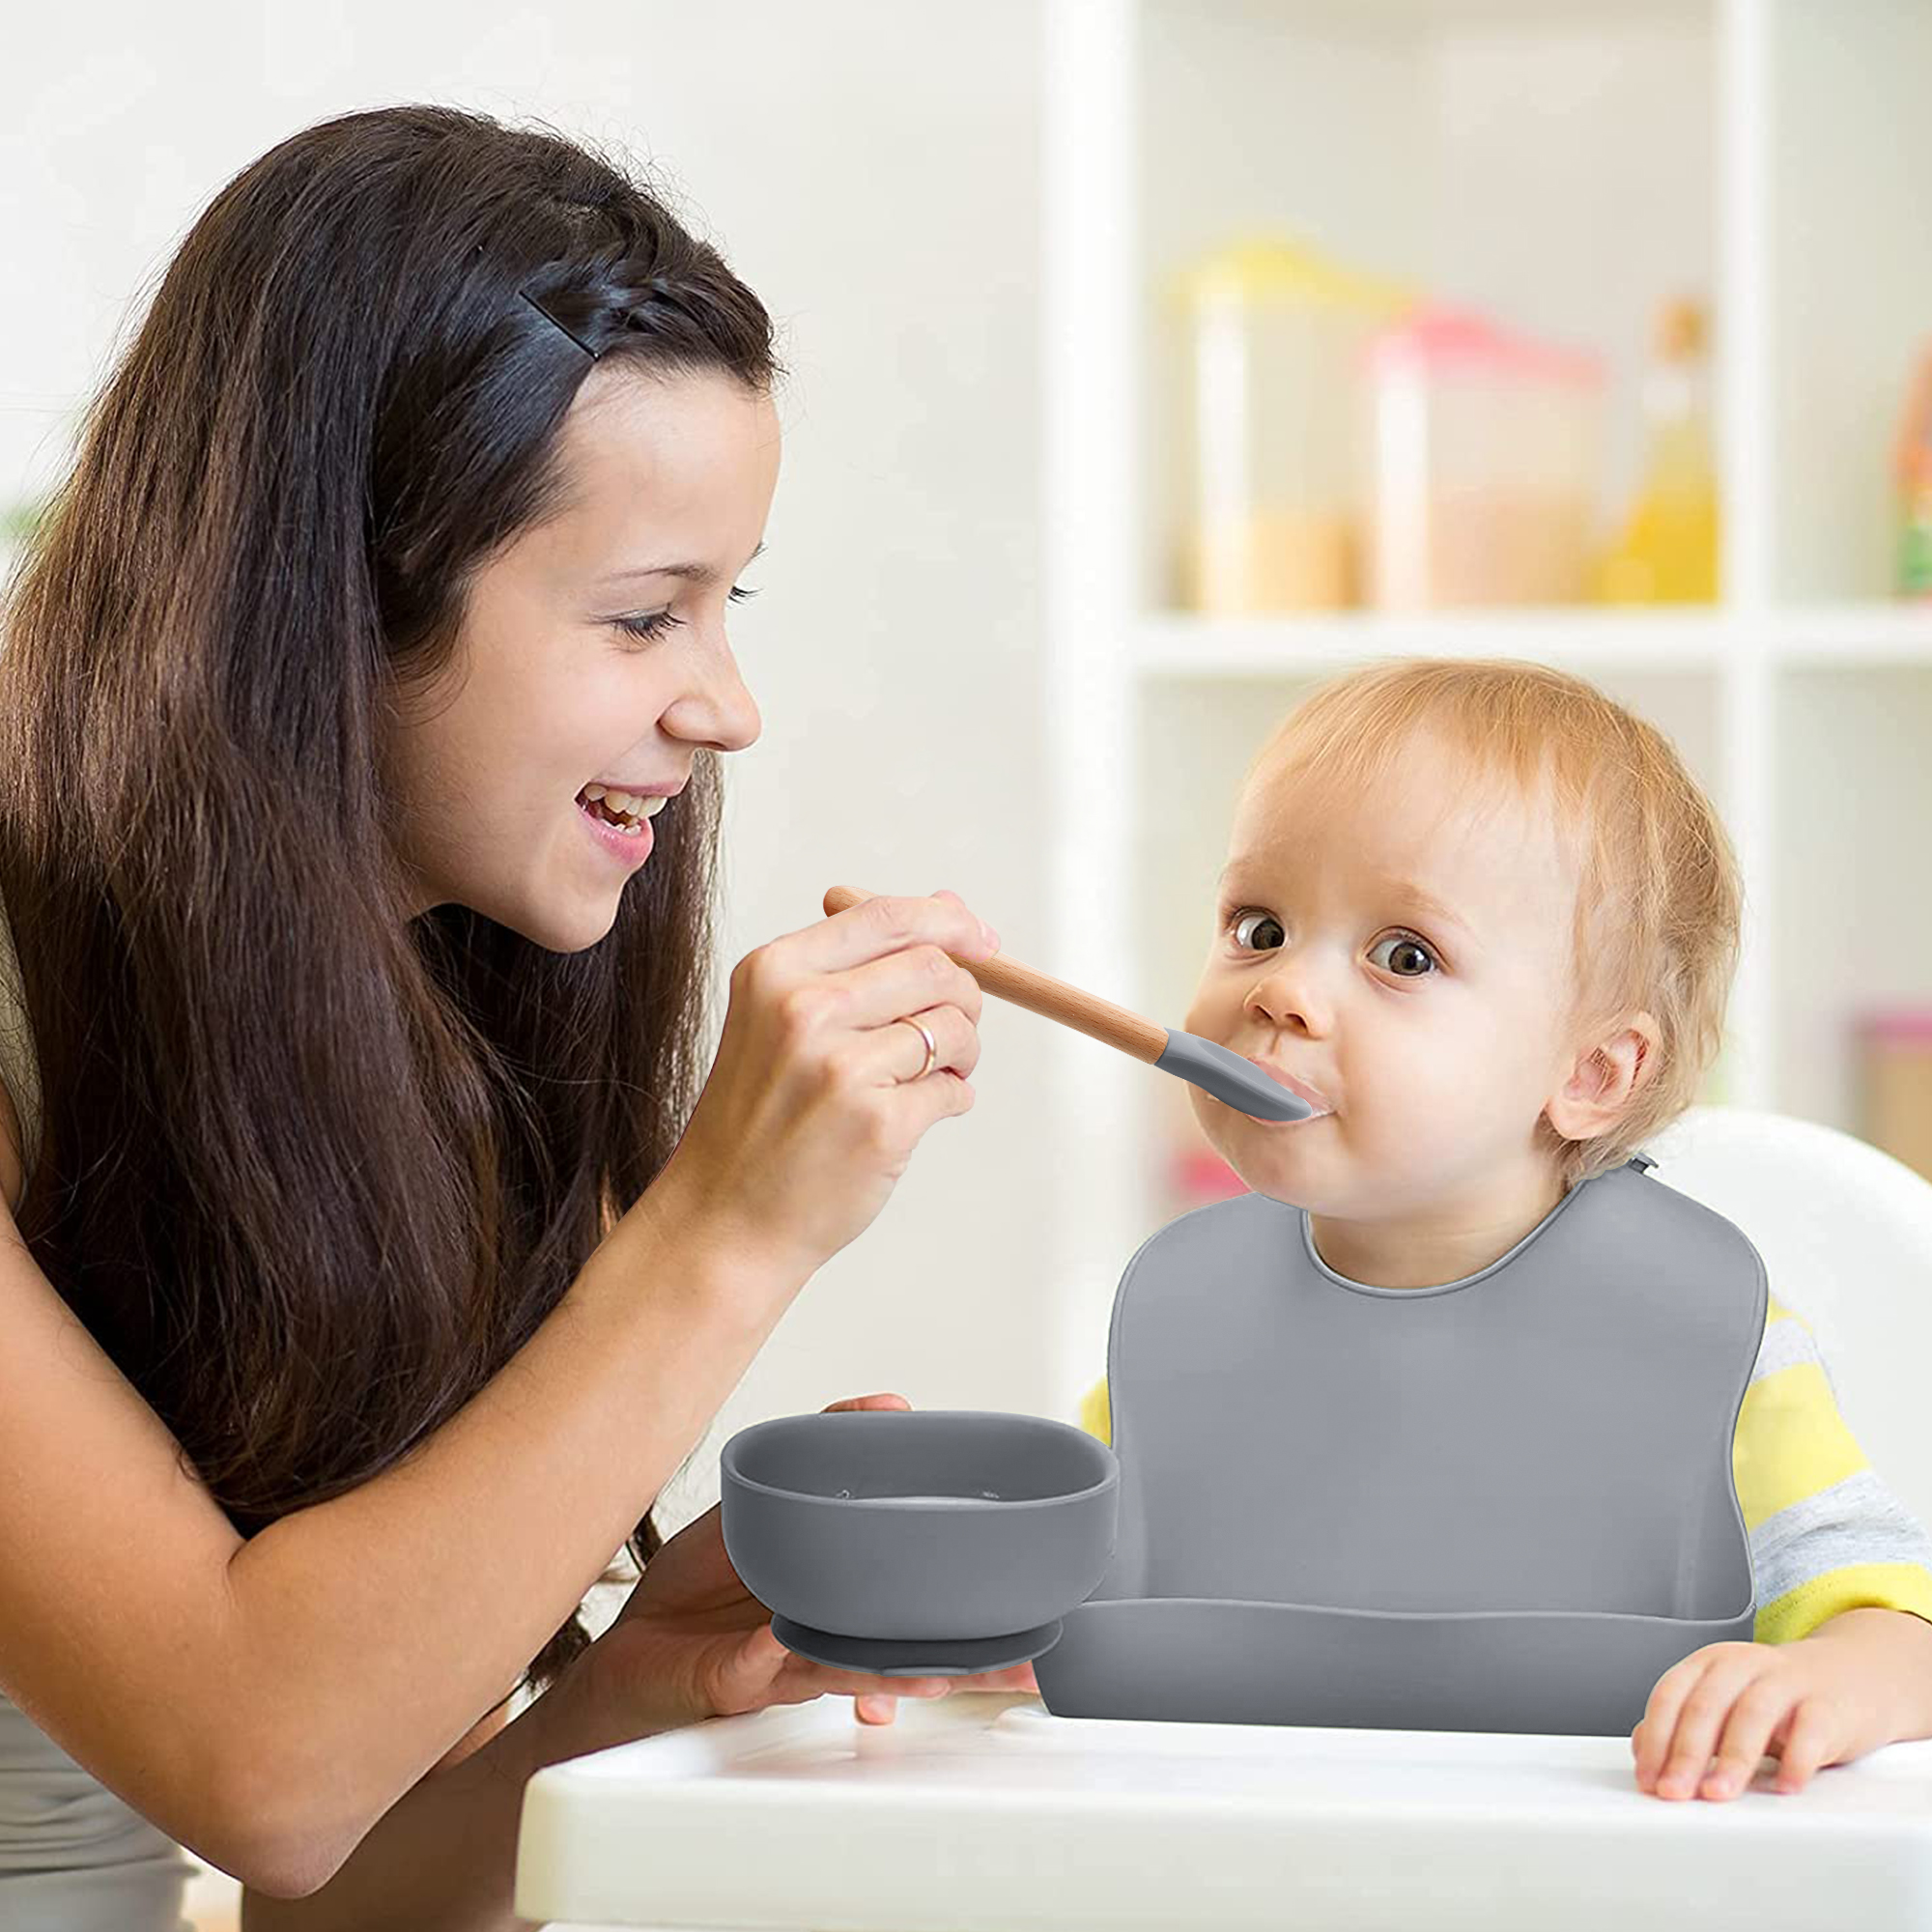 https://www.silicon-wholesale.com/news/best-feeding-sets-for-baby-l-melikey